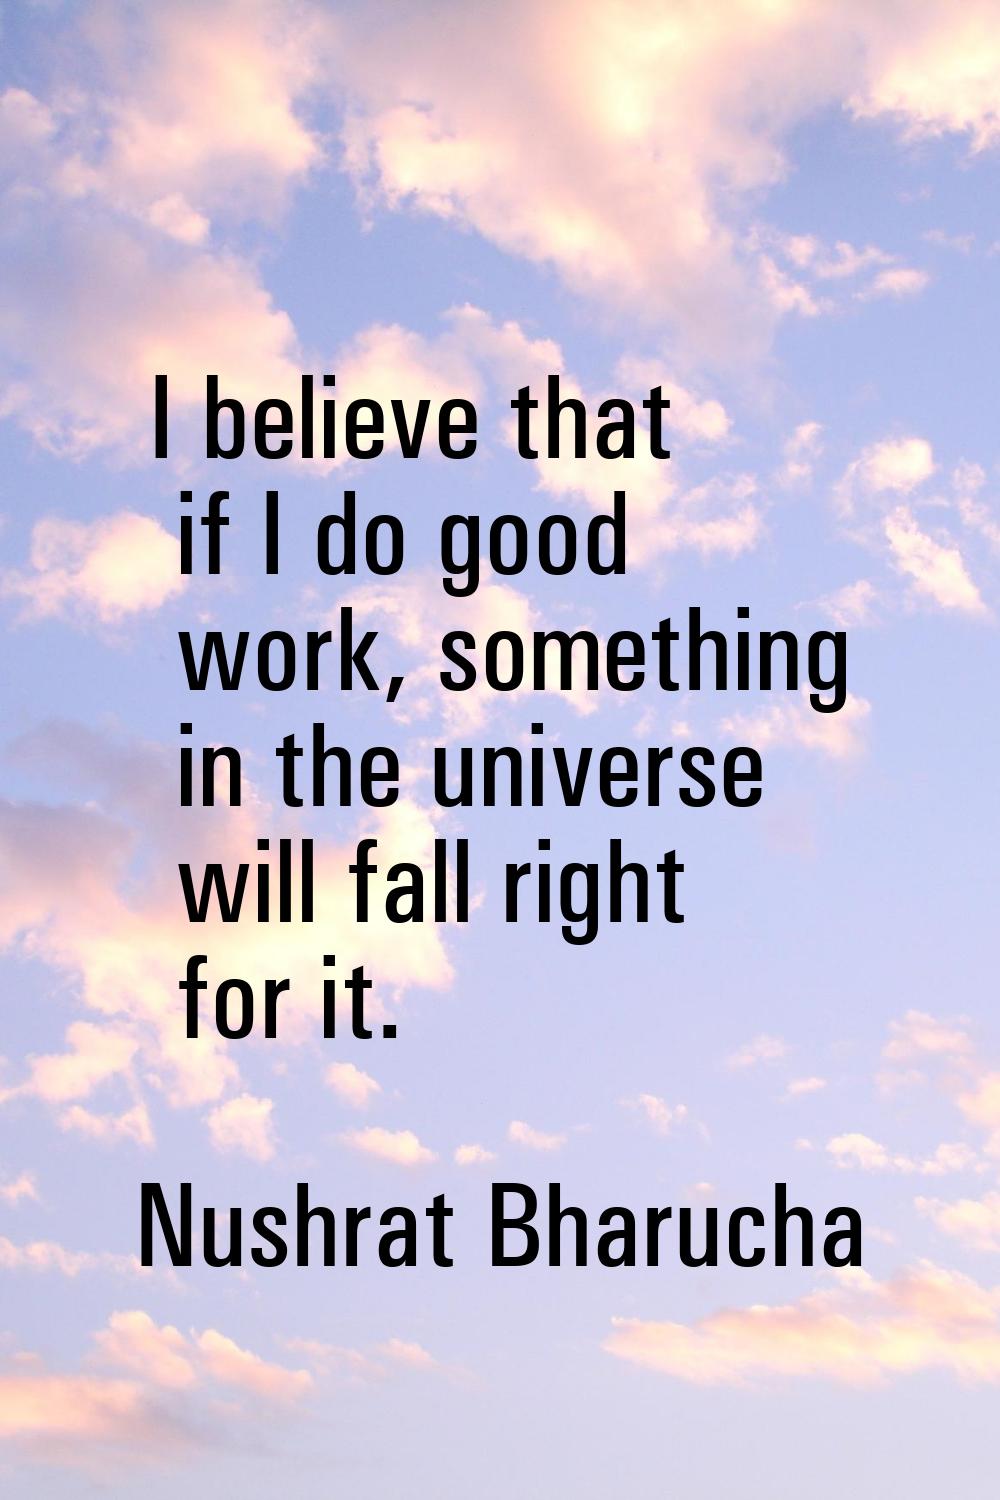 I believe that if I do good work, something in the universe will fall right for it.